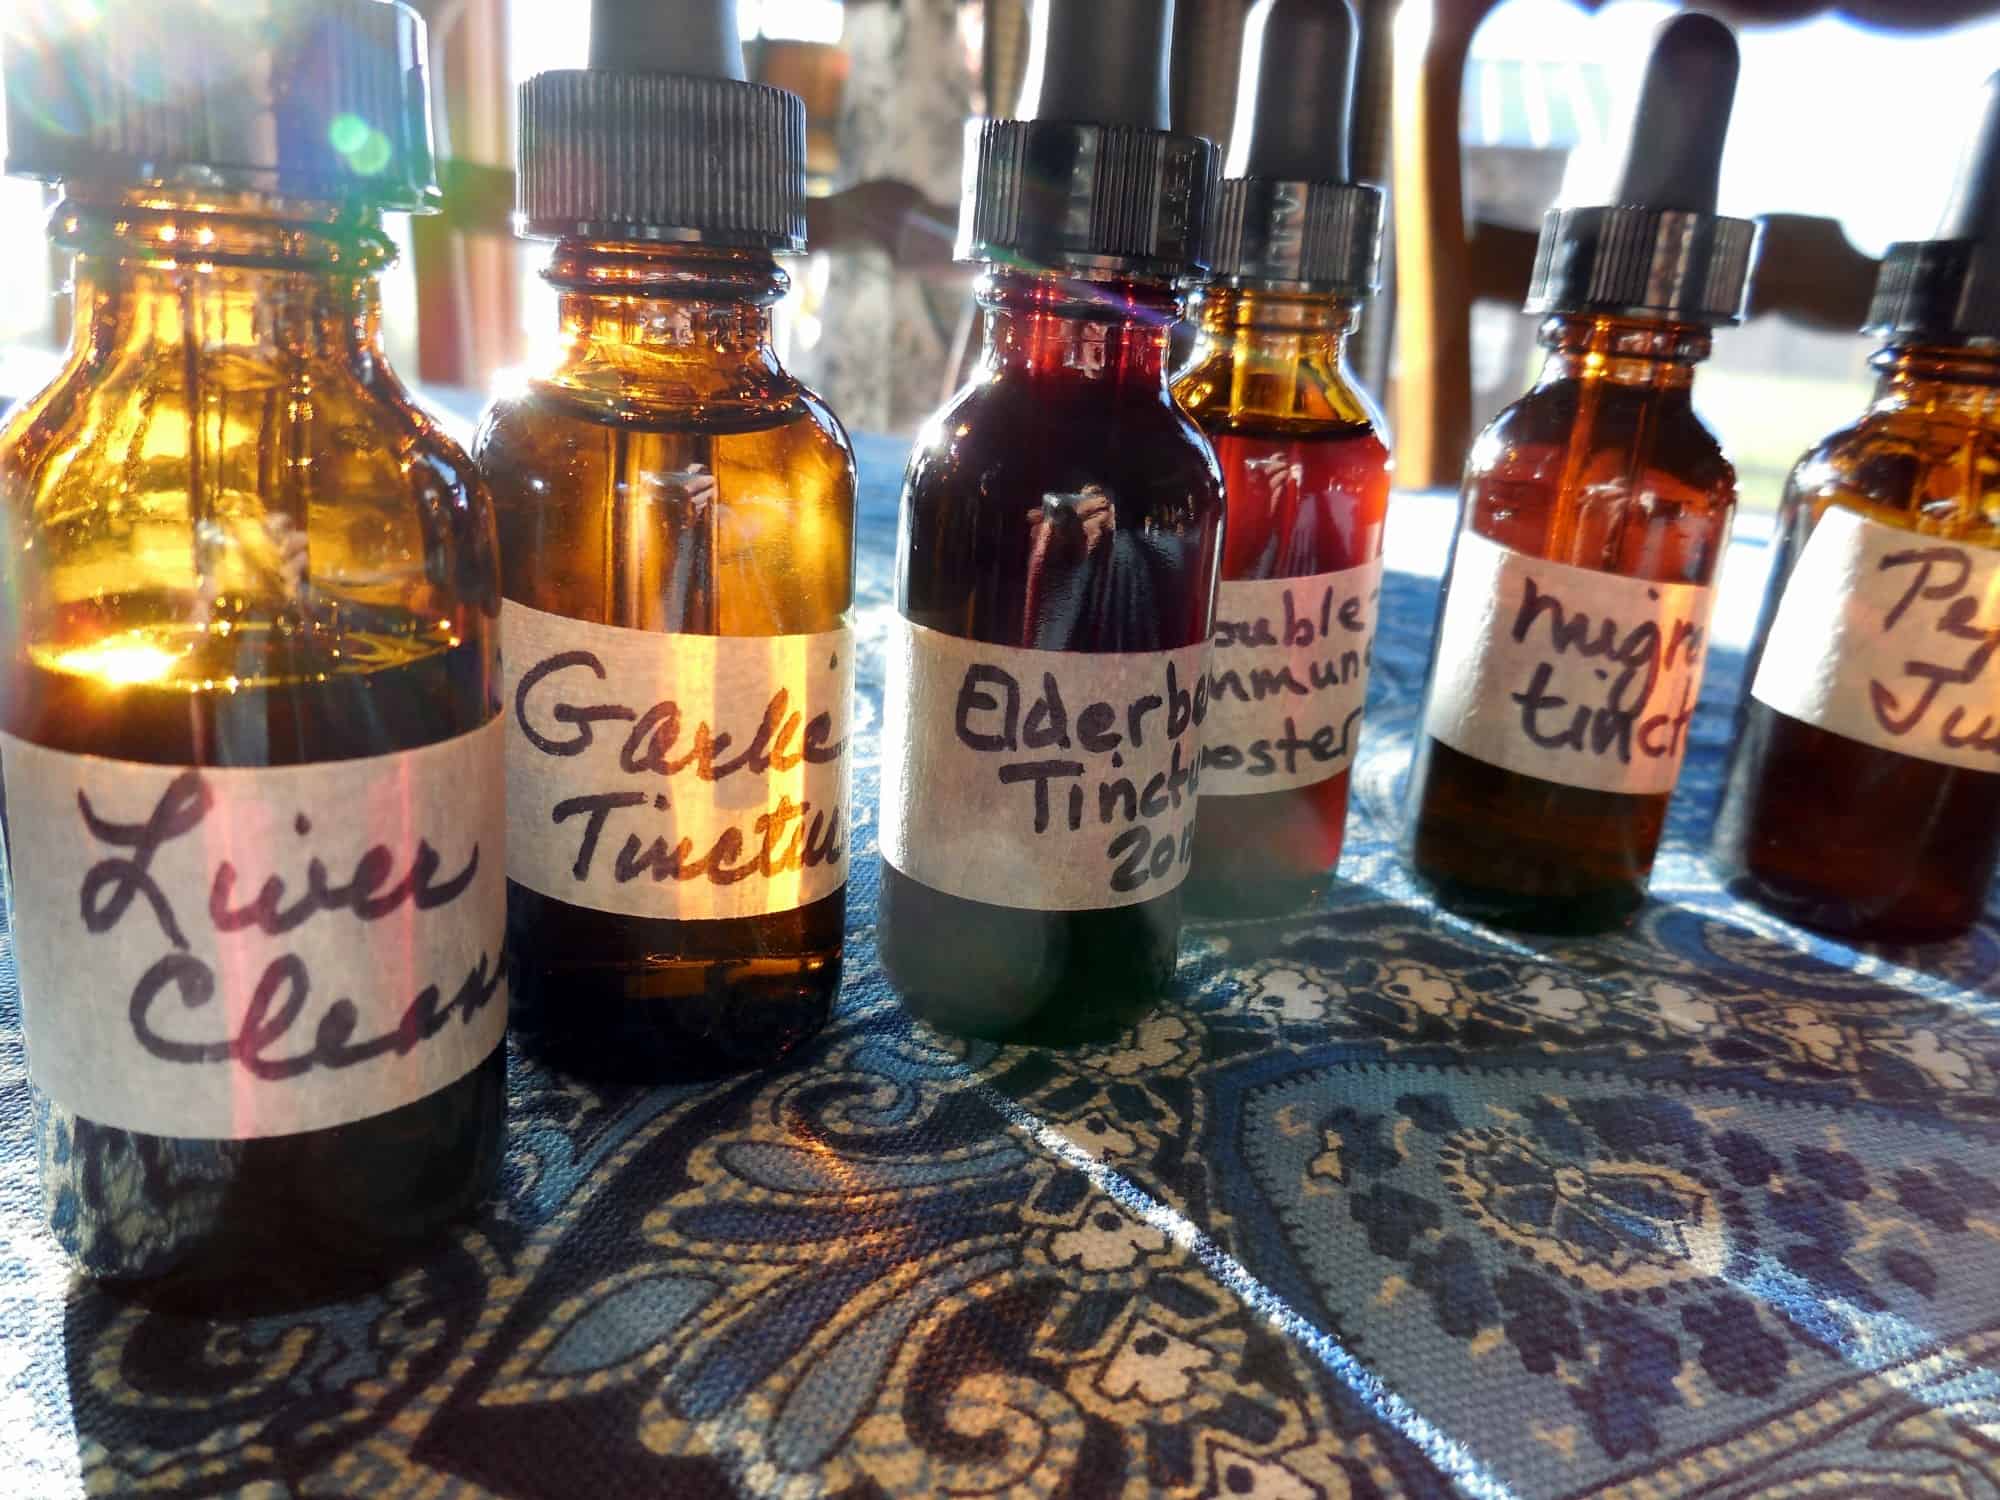  A collection of the herbal remedies